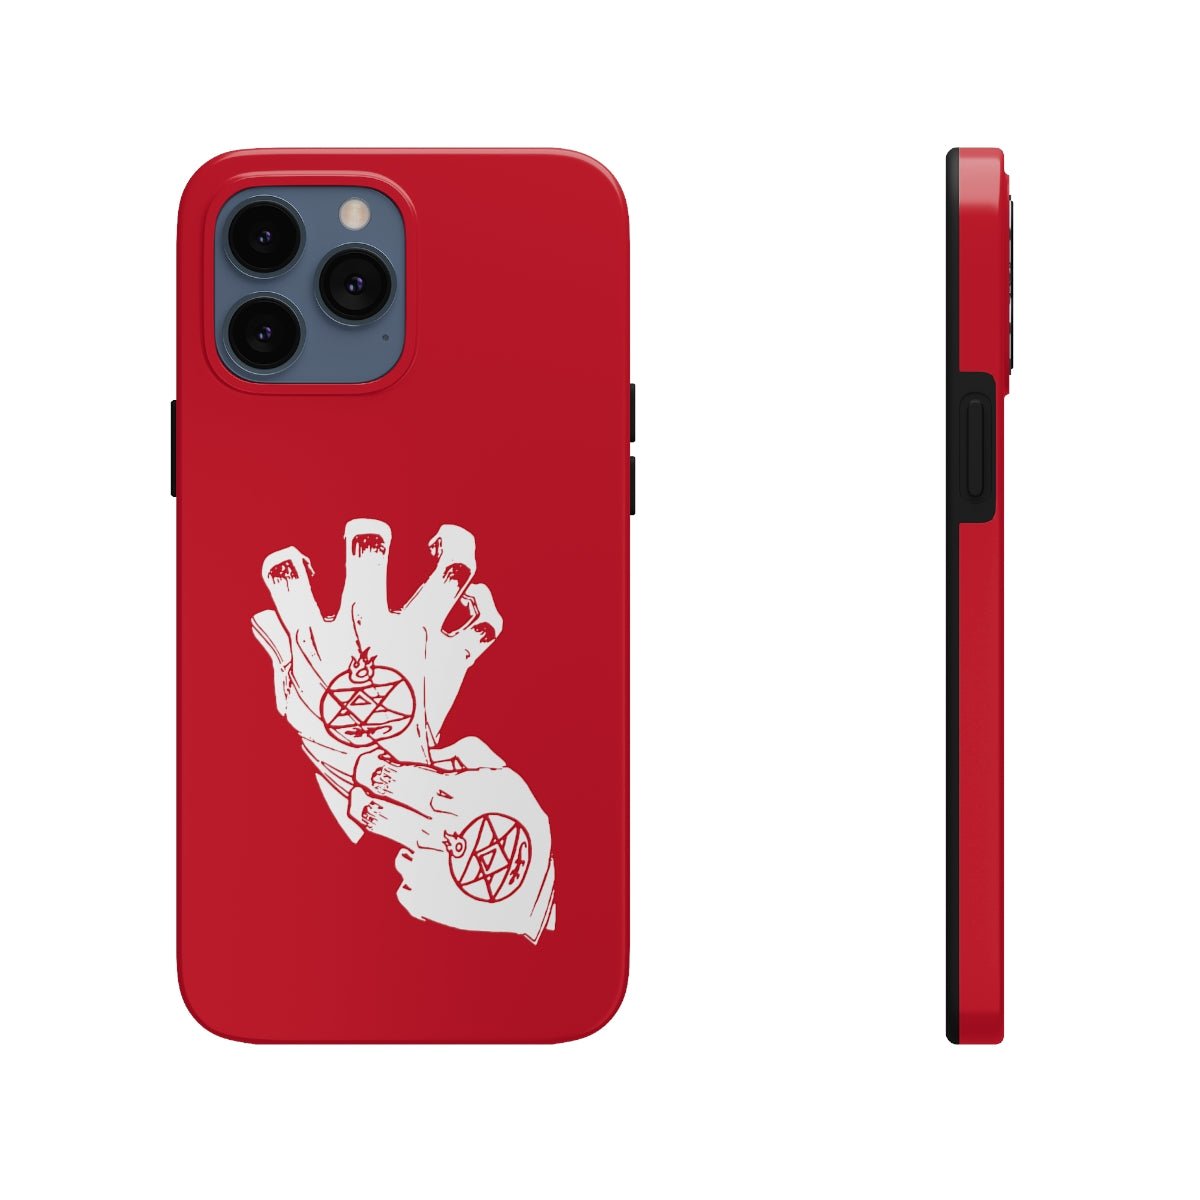 Roy Mustang Fullmetal Alchemist Anime iPhone Case (Series 12, 13, 14) - One Punch Fits